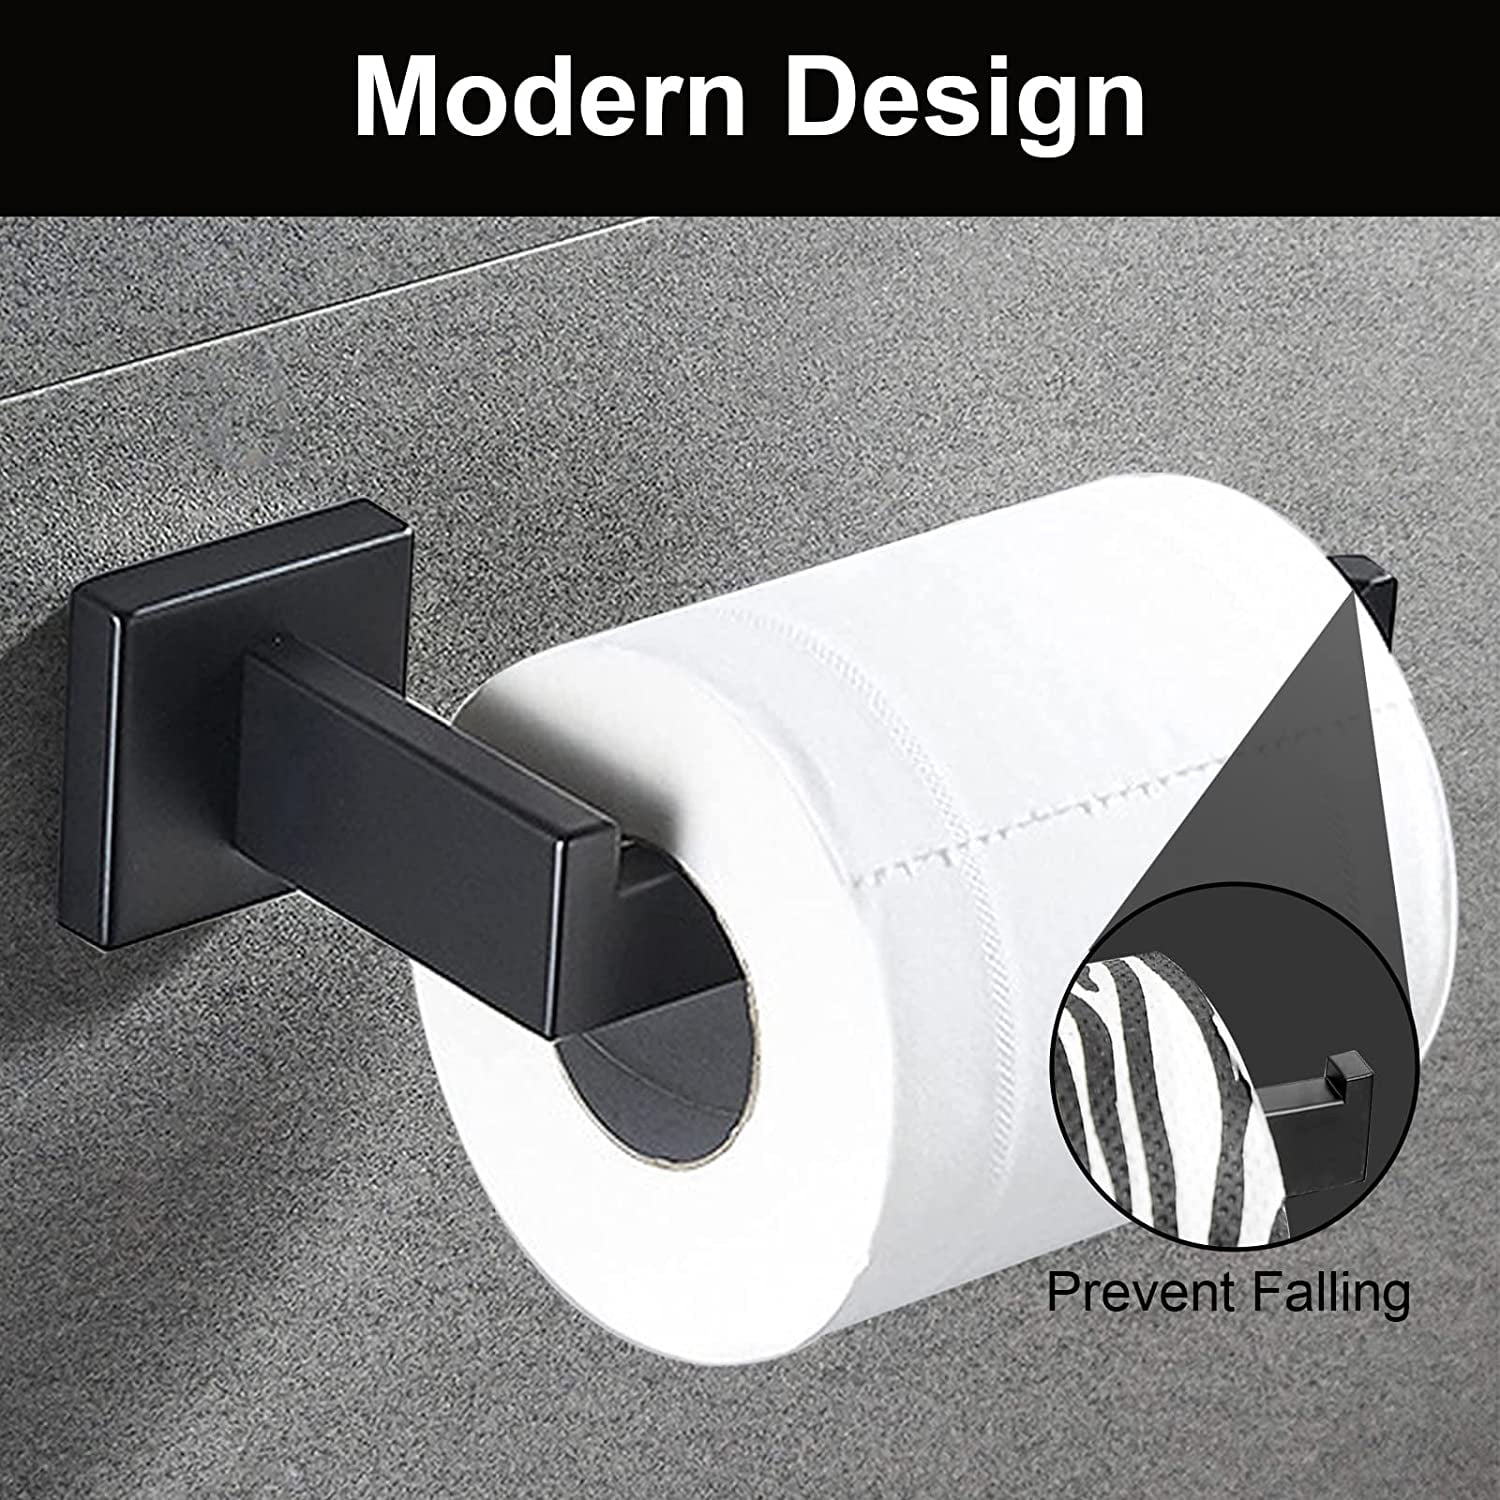  NearMoon Bathroom Square Toilet Paper Holder, Premium SUS304  Stainless Steel Rustproof Wall Mounted Toilet Roll Holder for Bathroom,  Kitchen, Washroom (Chrome Finish) : Tools & Home Improvement